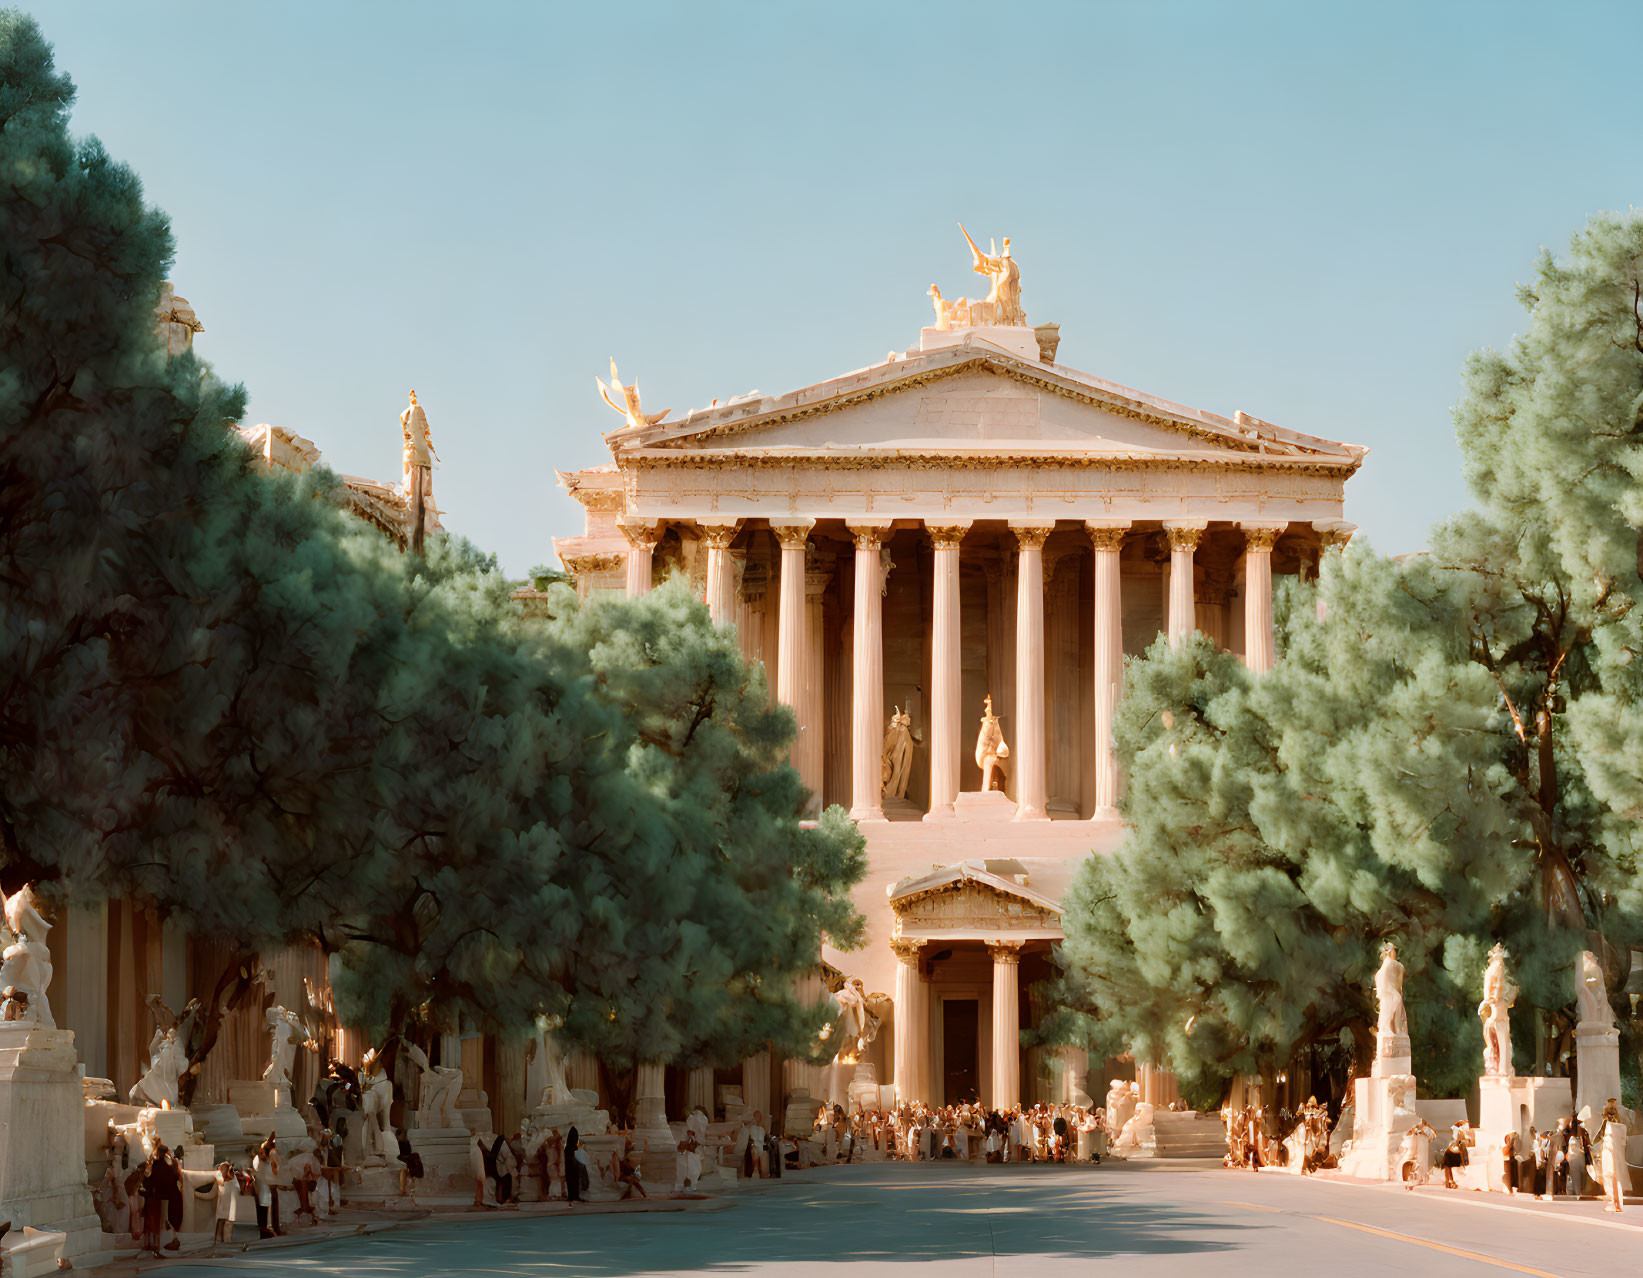 Neoclassical Building with Corinthian Columns and Statues